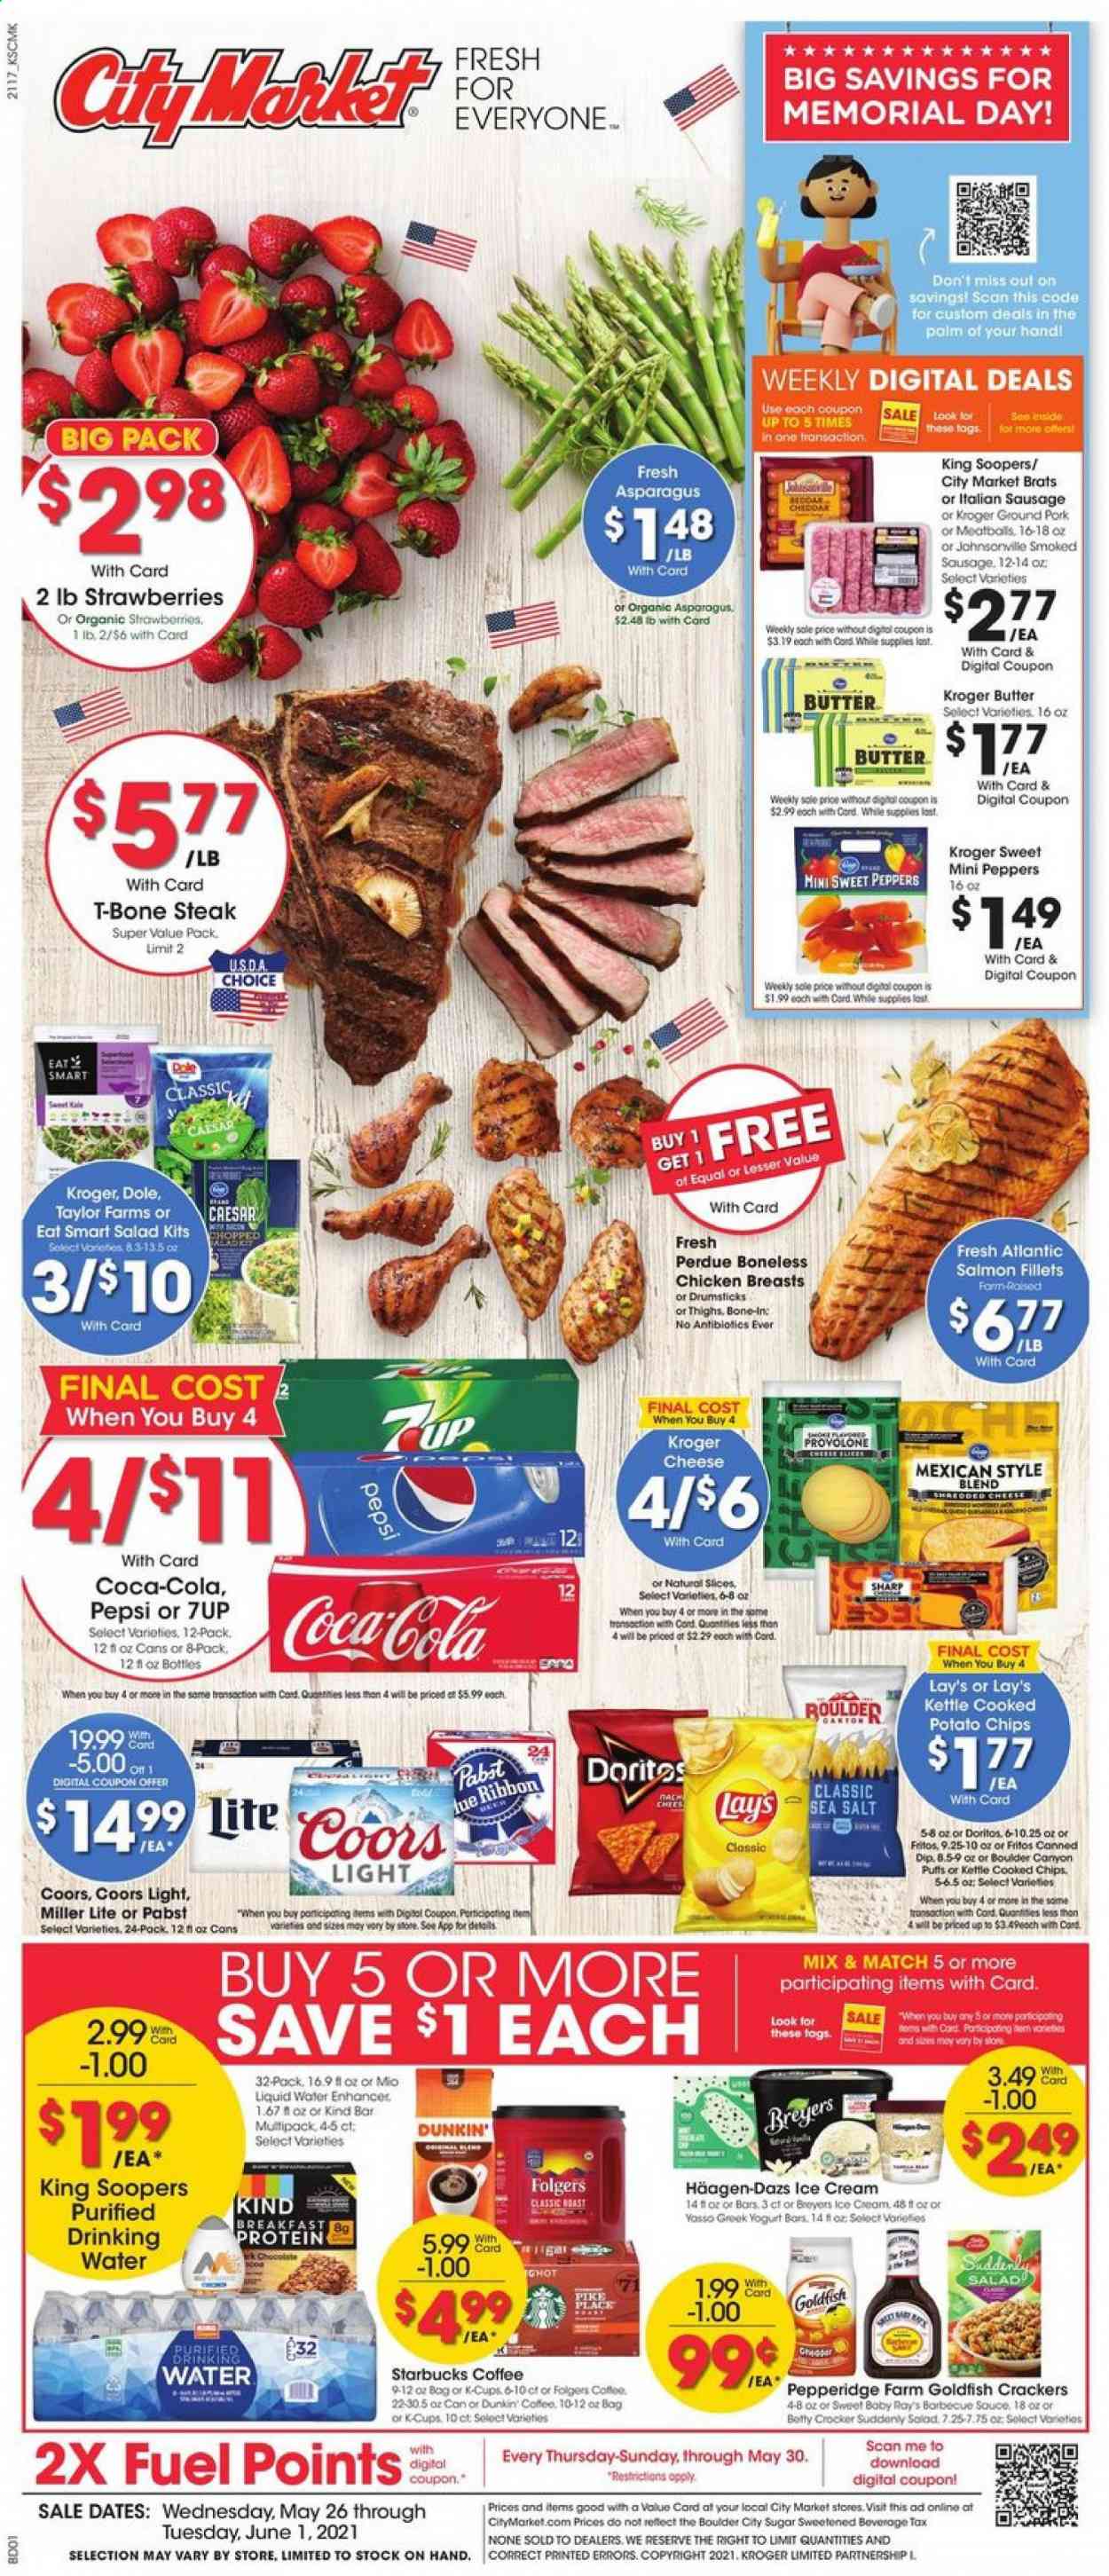 thumbnail - City Market Flyer - 05/26/2021 - 06/01/2021 - Sales products - asparagus, sweet peppers, kale, salad, Dole, peppers, strawberries, salmon, salmon fillet, Perdue®, Johnsonville, sausage, smoked sausage, italian sausage, Provolone, greek yoghurt, yoghurt, butter, dip, ice cream, Häagen-Dazs, crackers, Doritos, Fritos, potato chips, chips, Lay’s, Goldfish, sugar, Coca-Cola, Pepsi, 7UP, tea, coffee, Starbucks, Folgers, beer, Miller Lite, Coors, chicken breasts, beef meat, t-bone steak, steak, ground pork, Sharp. Page 1.